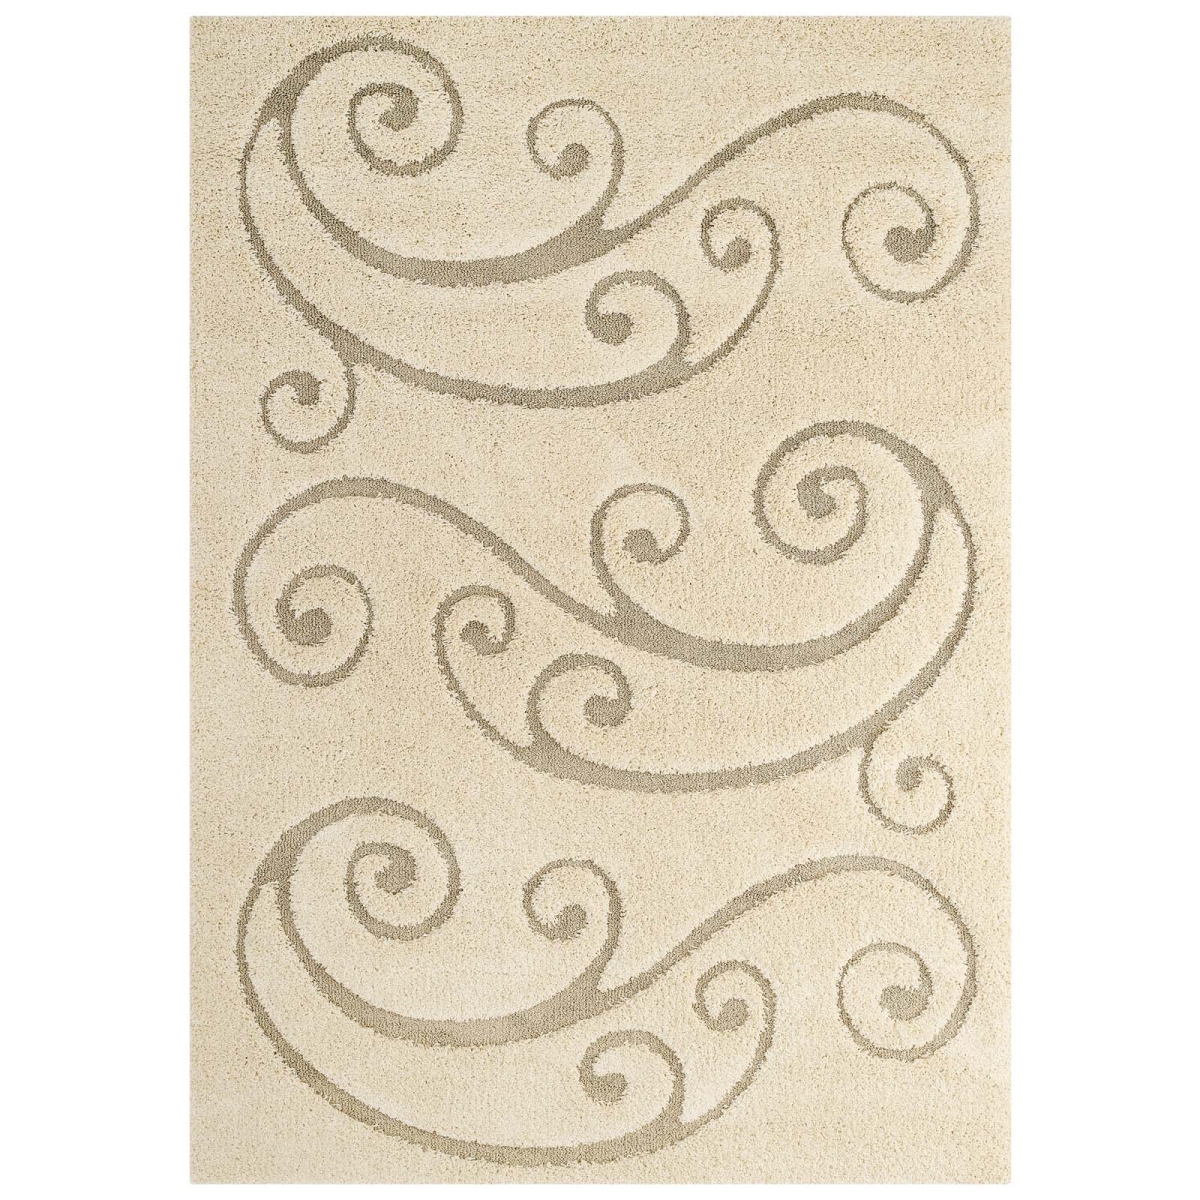 R-1148a-58 5 X 8 Ft. Sprout Scrolling Vine Shag Polypropylener Area Rug - Creame & Beige, 1 X 63 X 89.5 In.